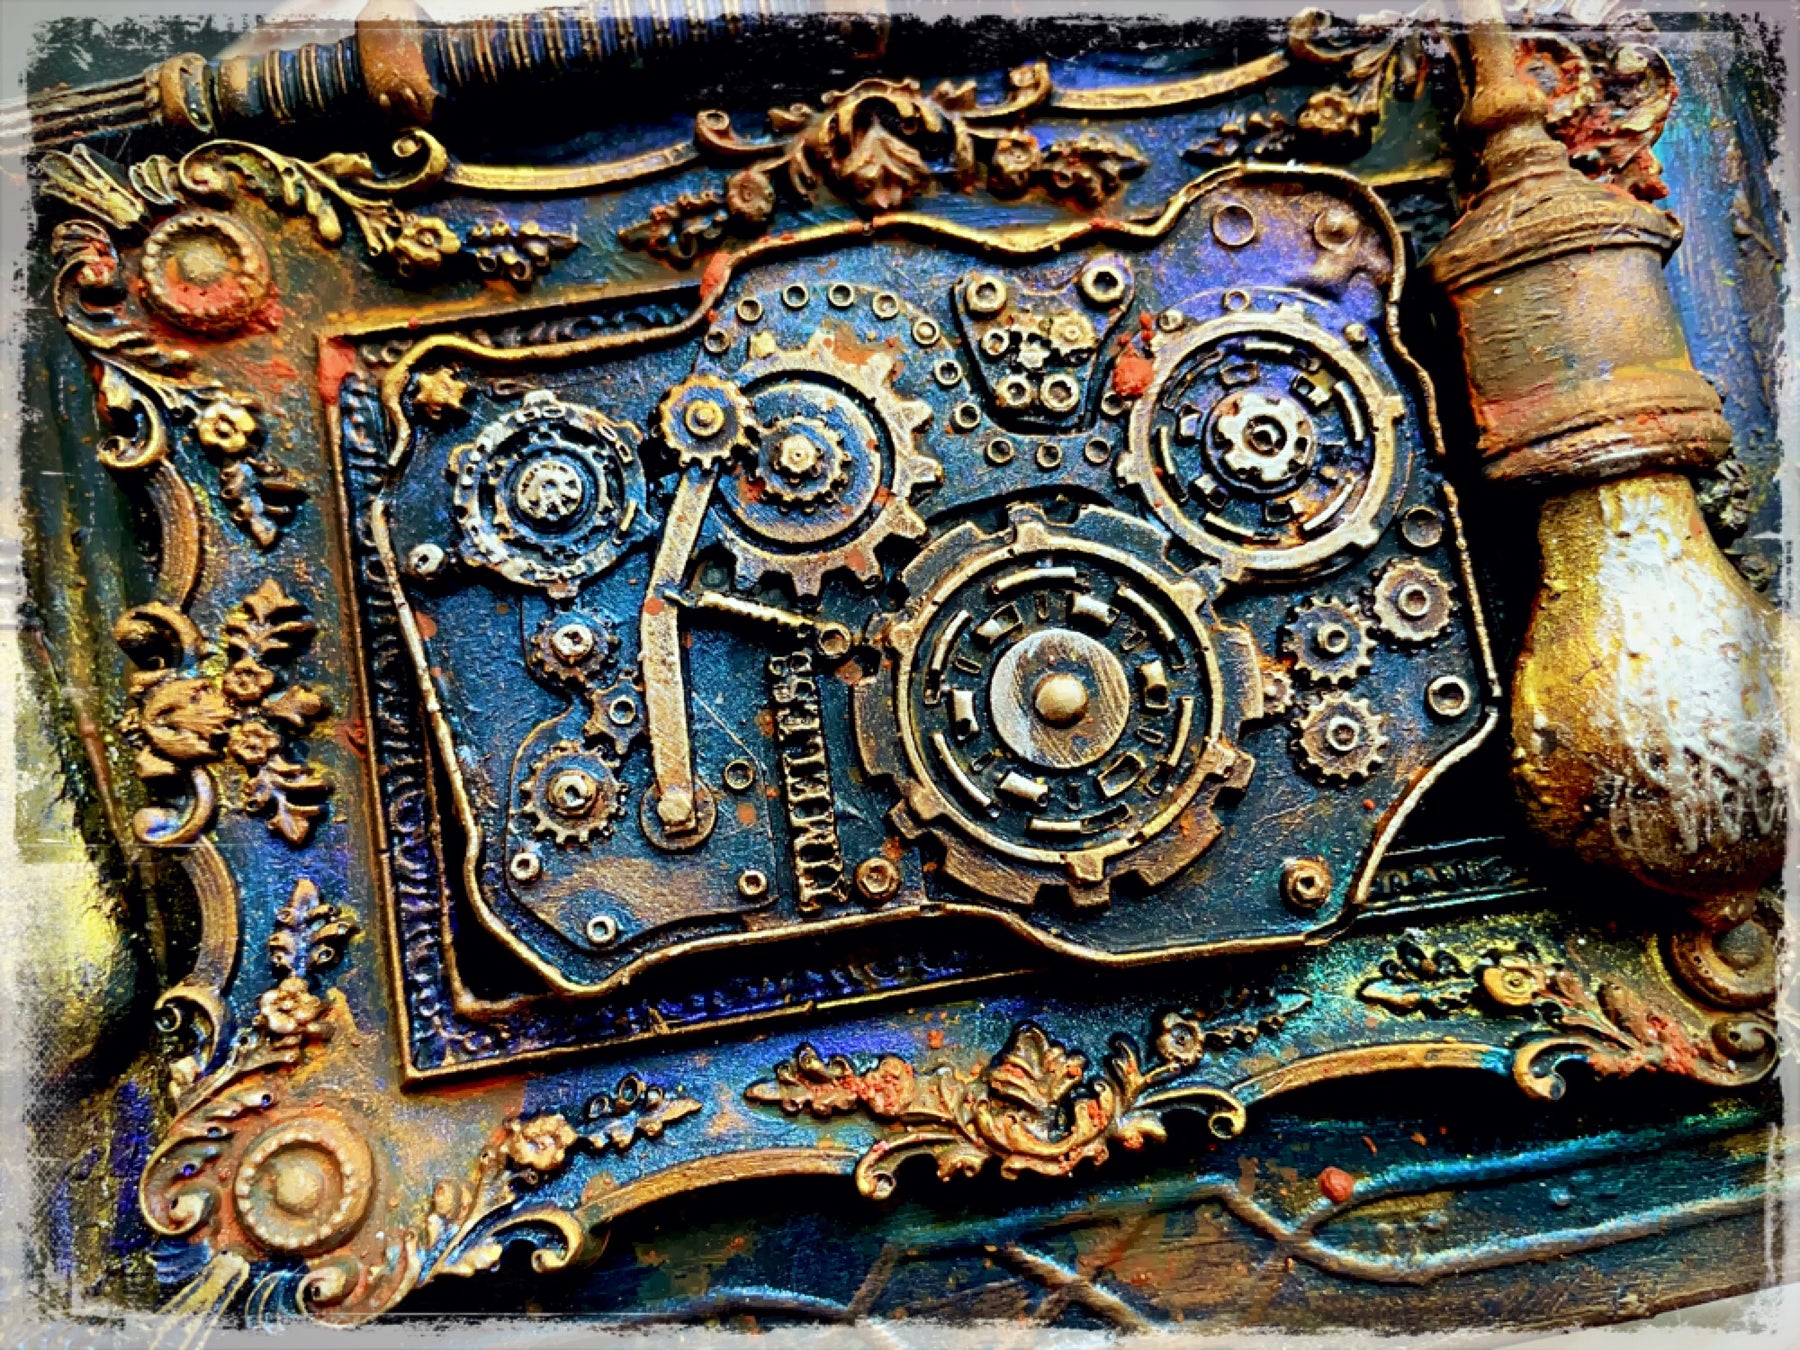 Steampunk altered Tin by LOUISE CROSBIE